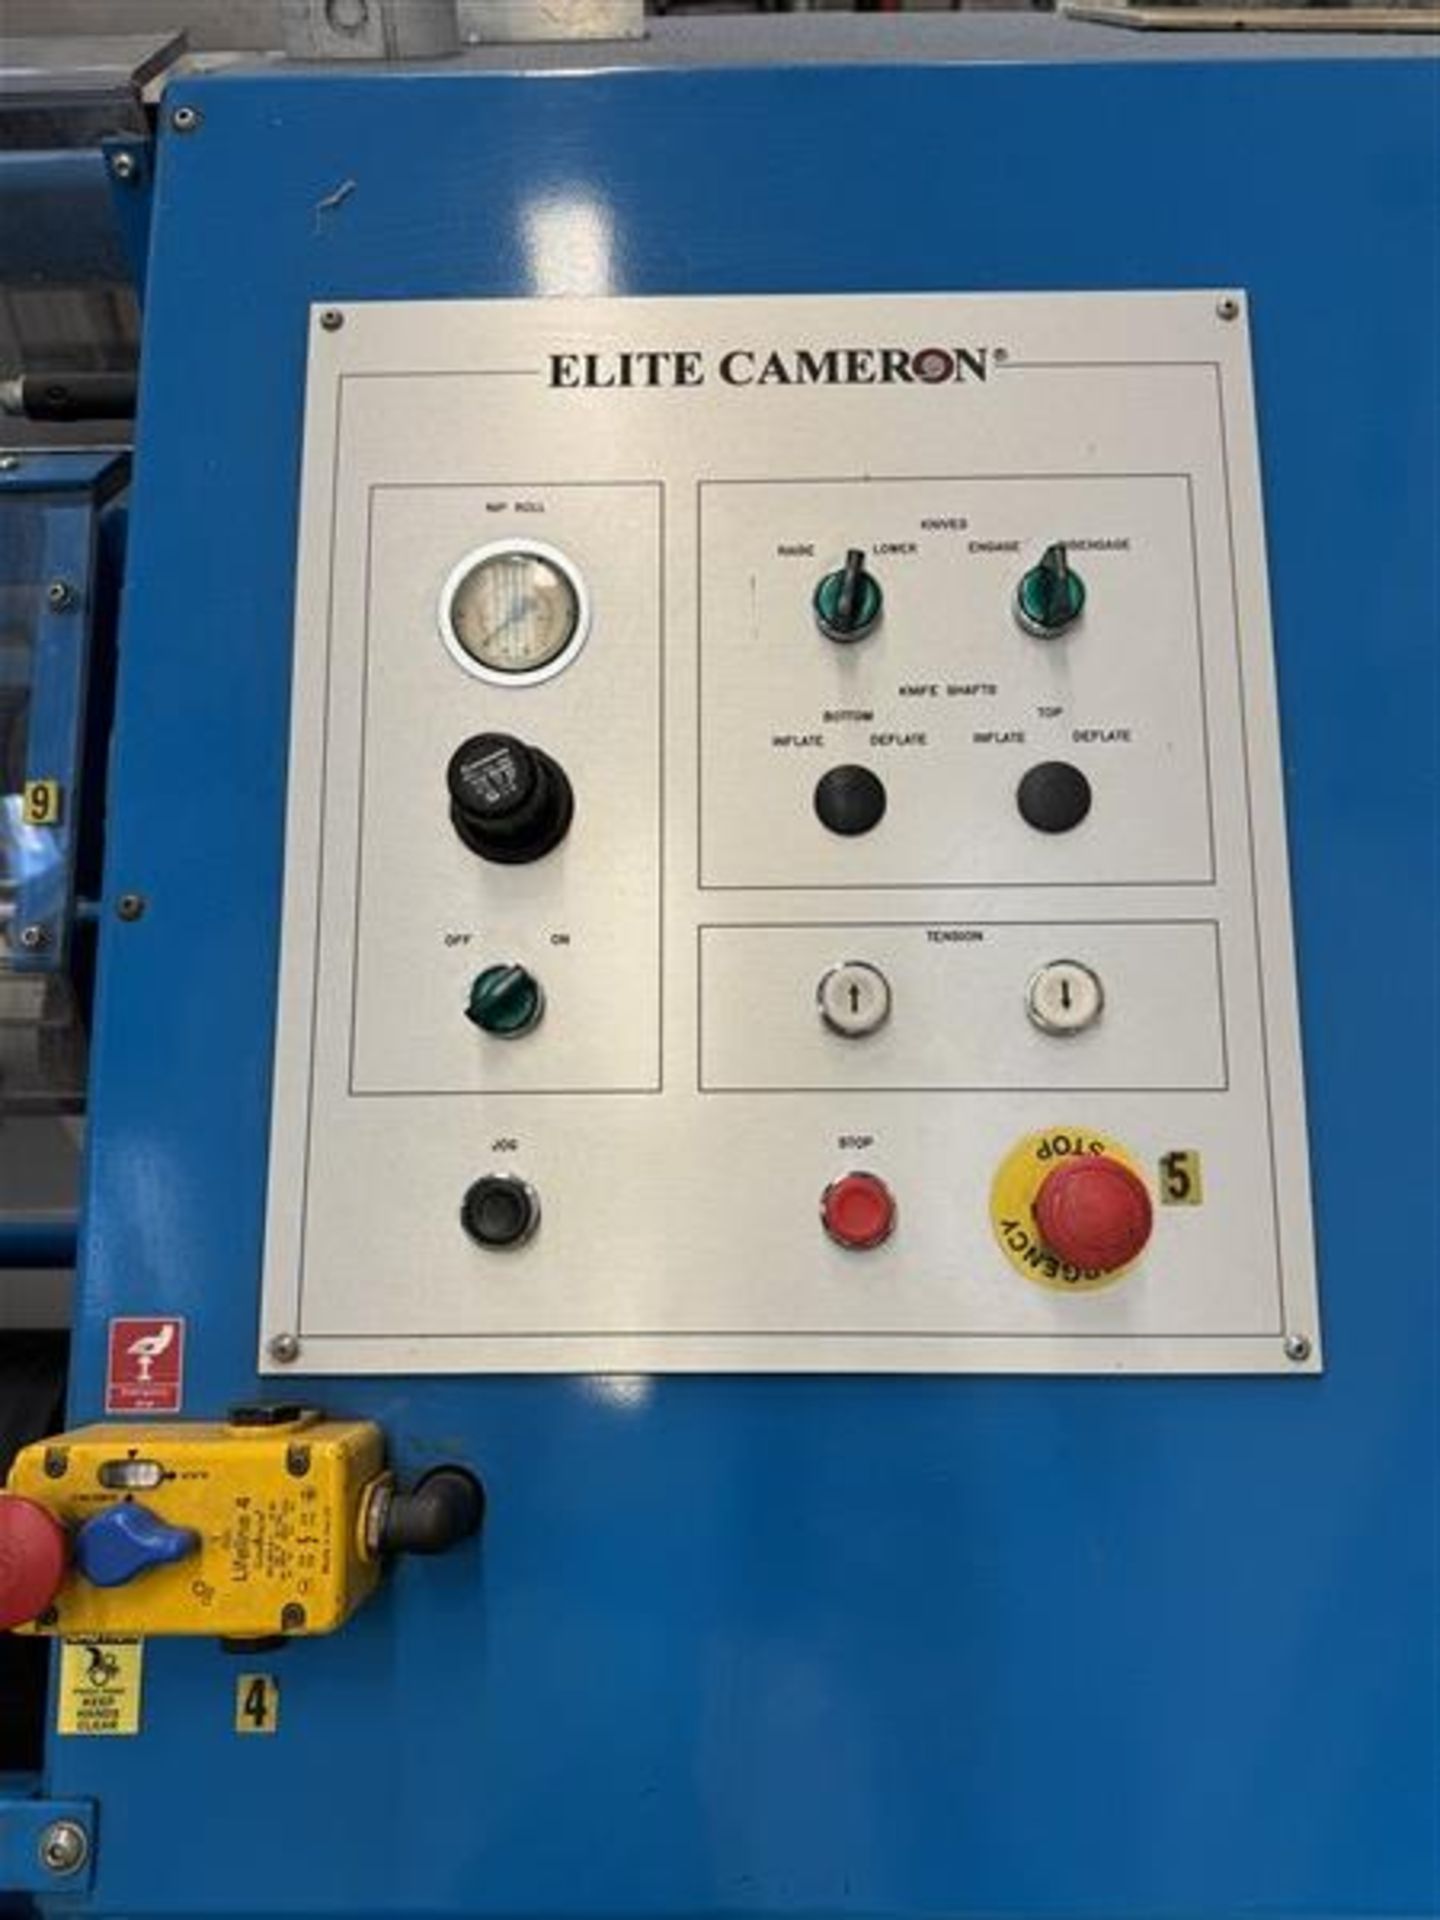 Elite Cameron CW600 automatic slitting machine, serial no. M02030 (2001) A work Method Statement and - Image 11 of 14